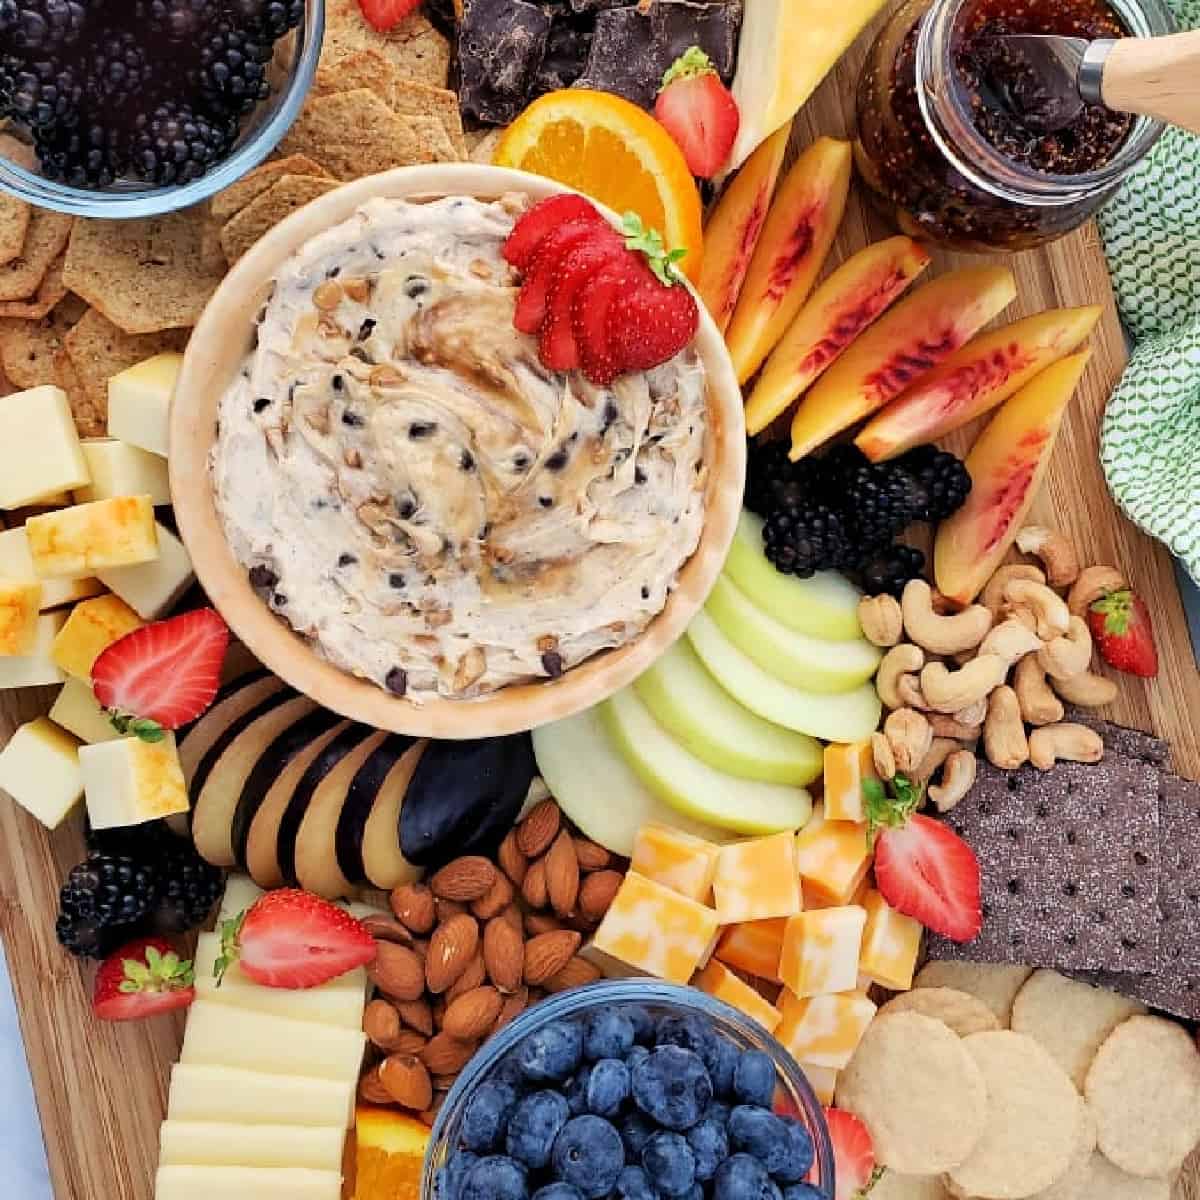 Top down view of fruit and cheese board.